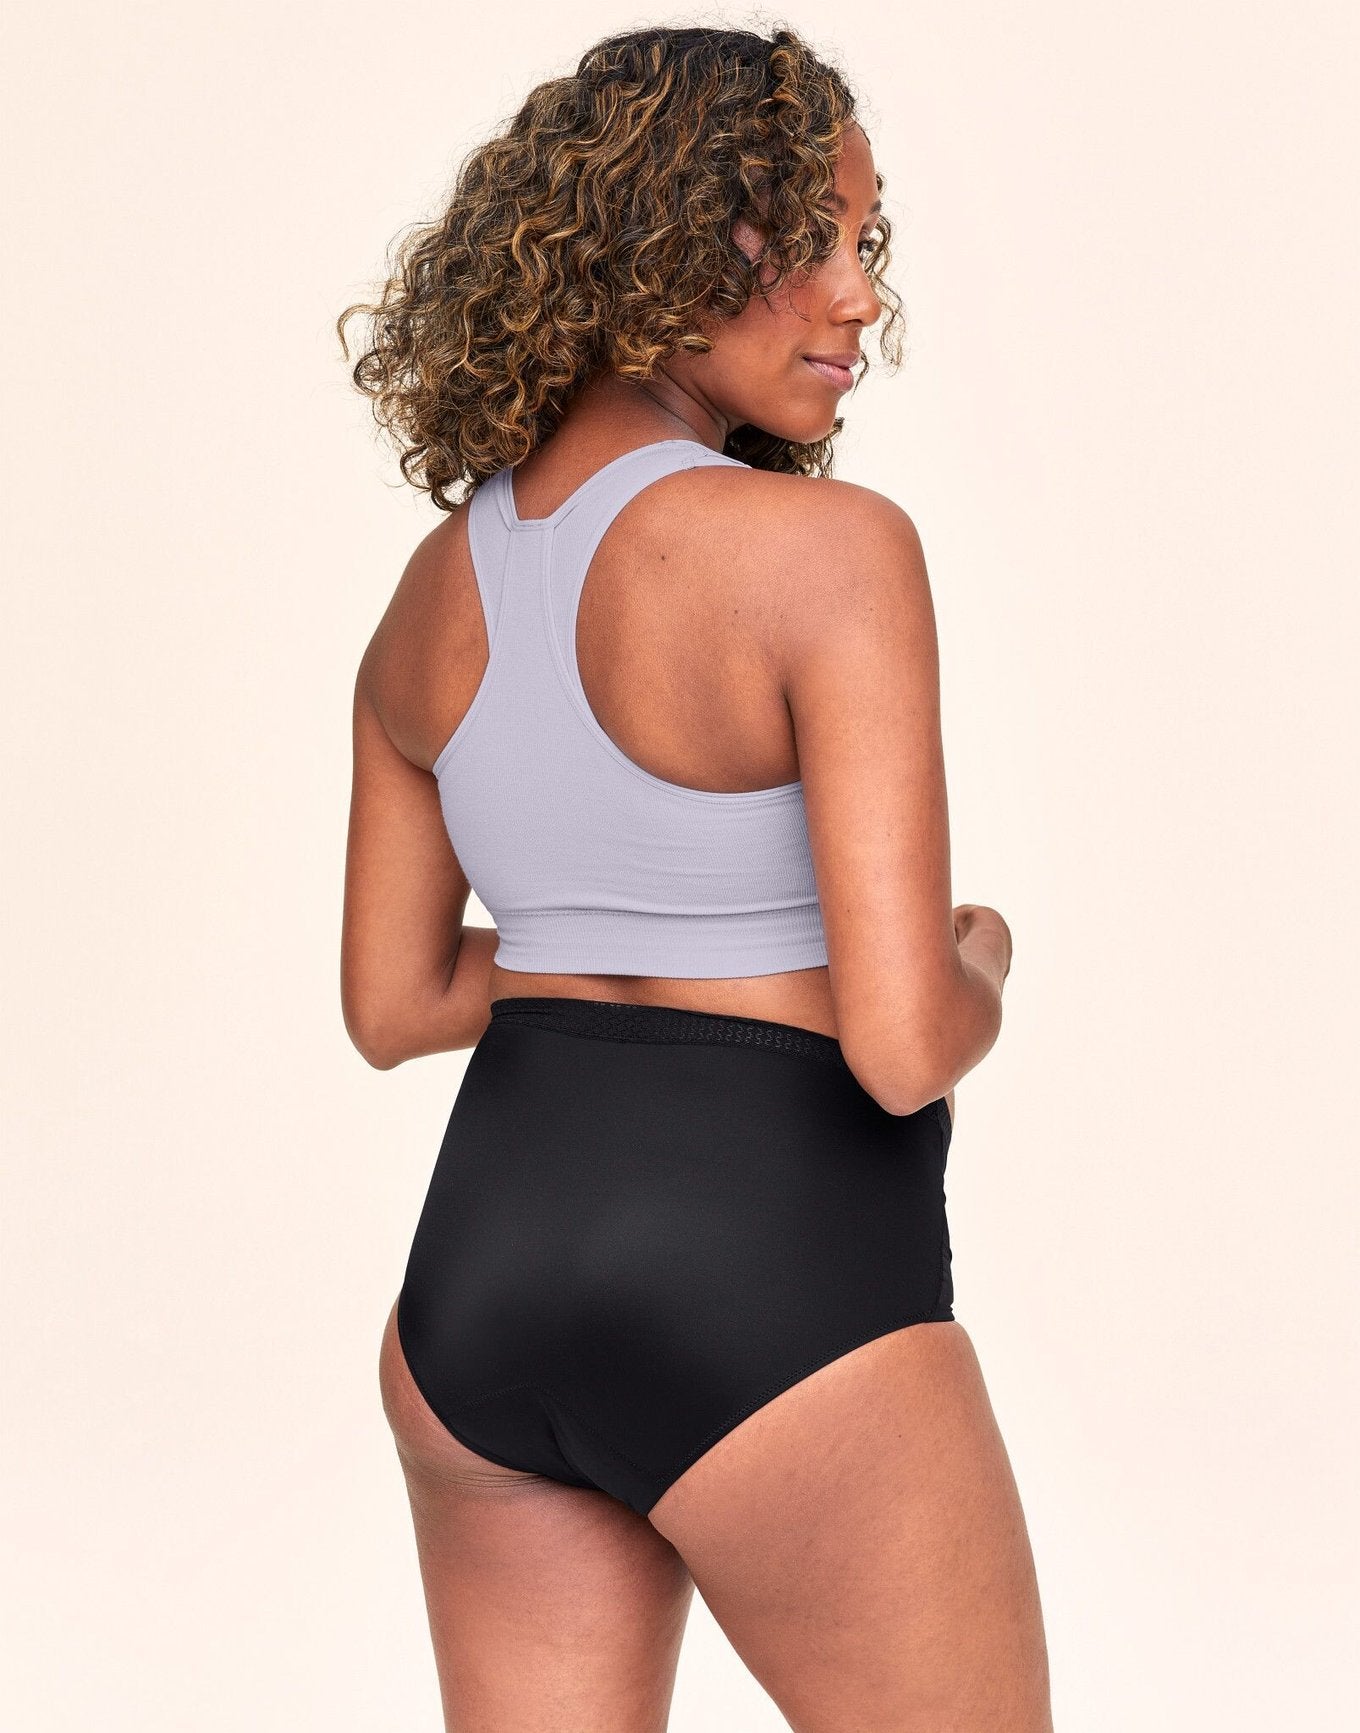 Belabumbum Mama Smoothing Brief Maternity & Postpartum  Absorbent Panty in color Jet Black and shape high waisted